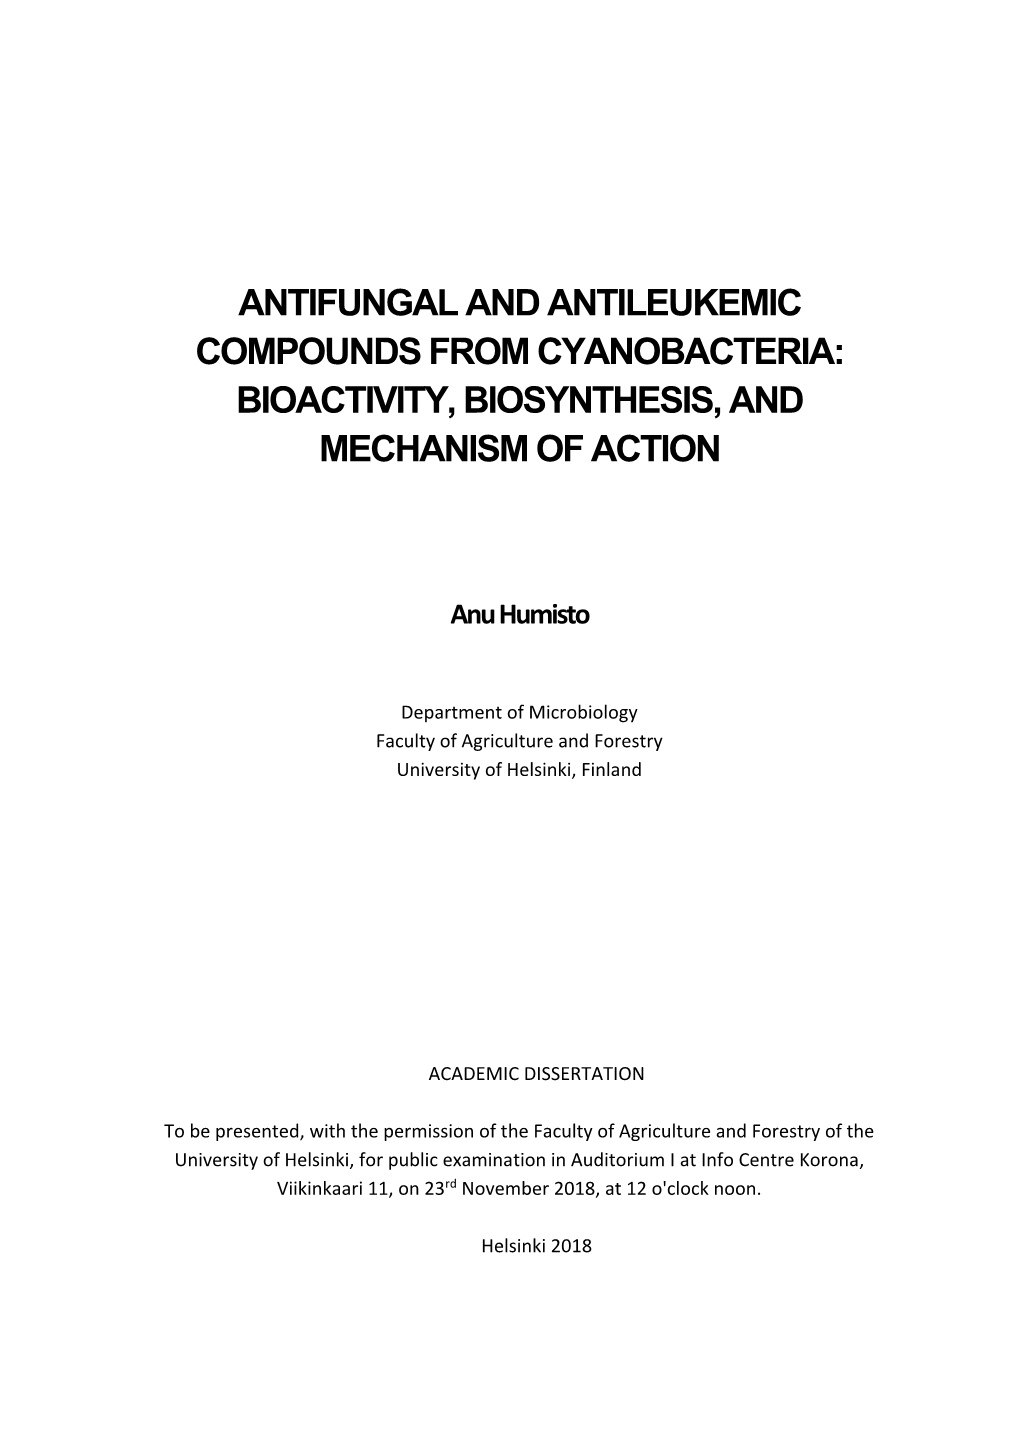 Antifungal and Antileukemic Compounds from Cyanobacteria: Bioactivity, Biosynthesis, and Mechanism of Action